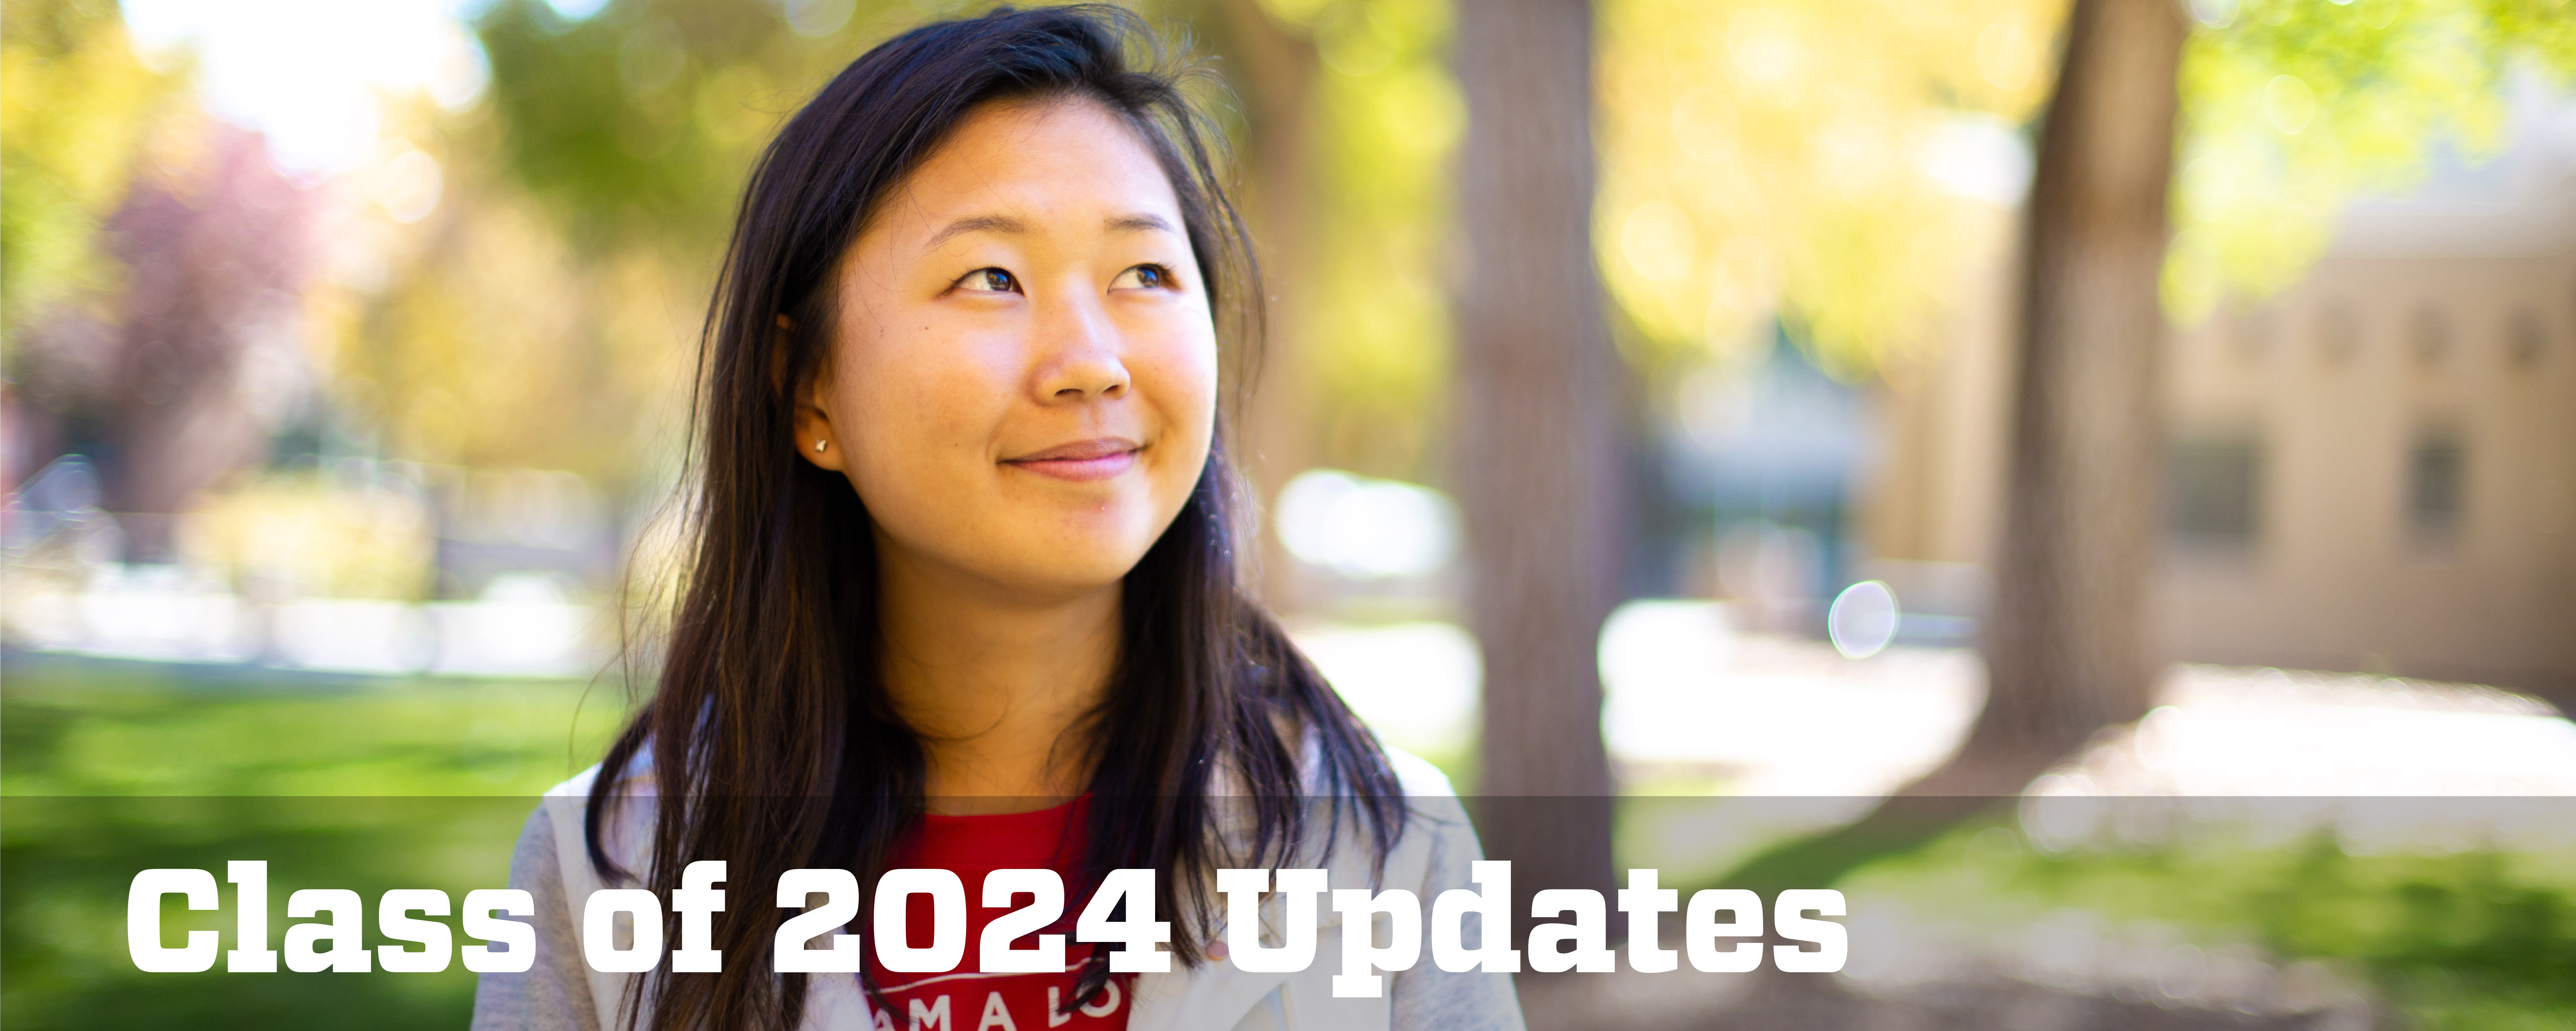 Class of 2024 :: Students | The University of New Mexico